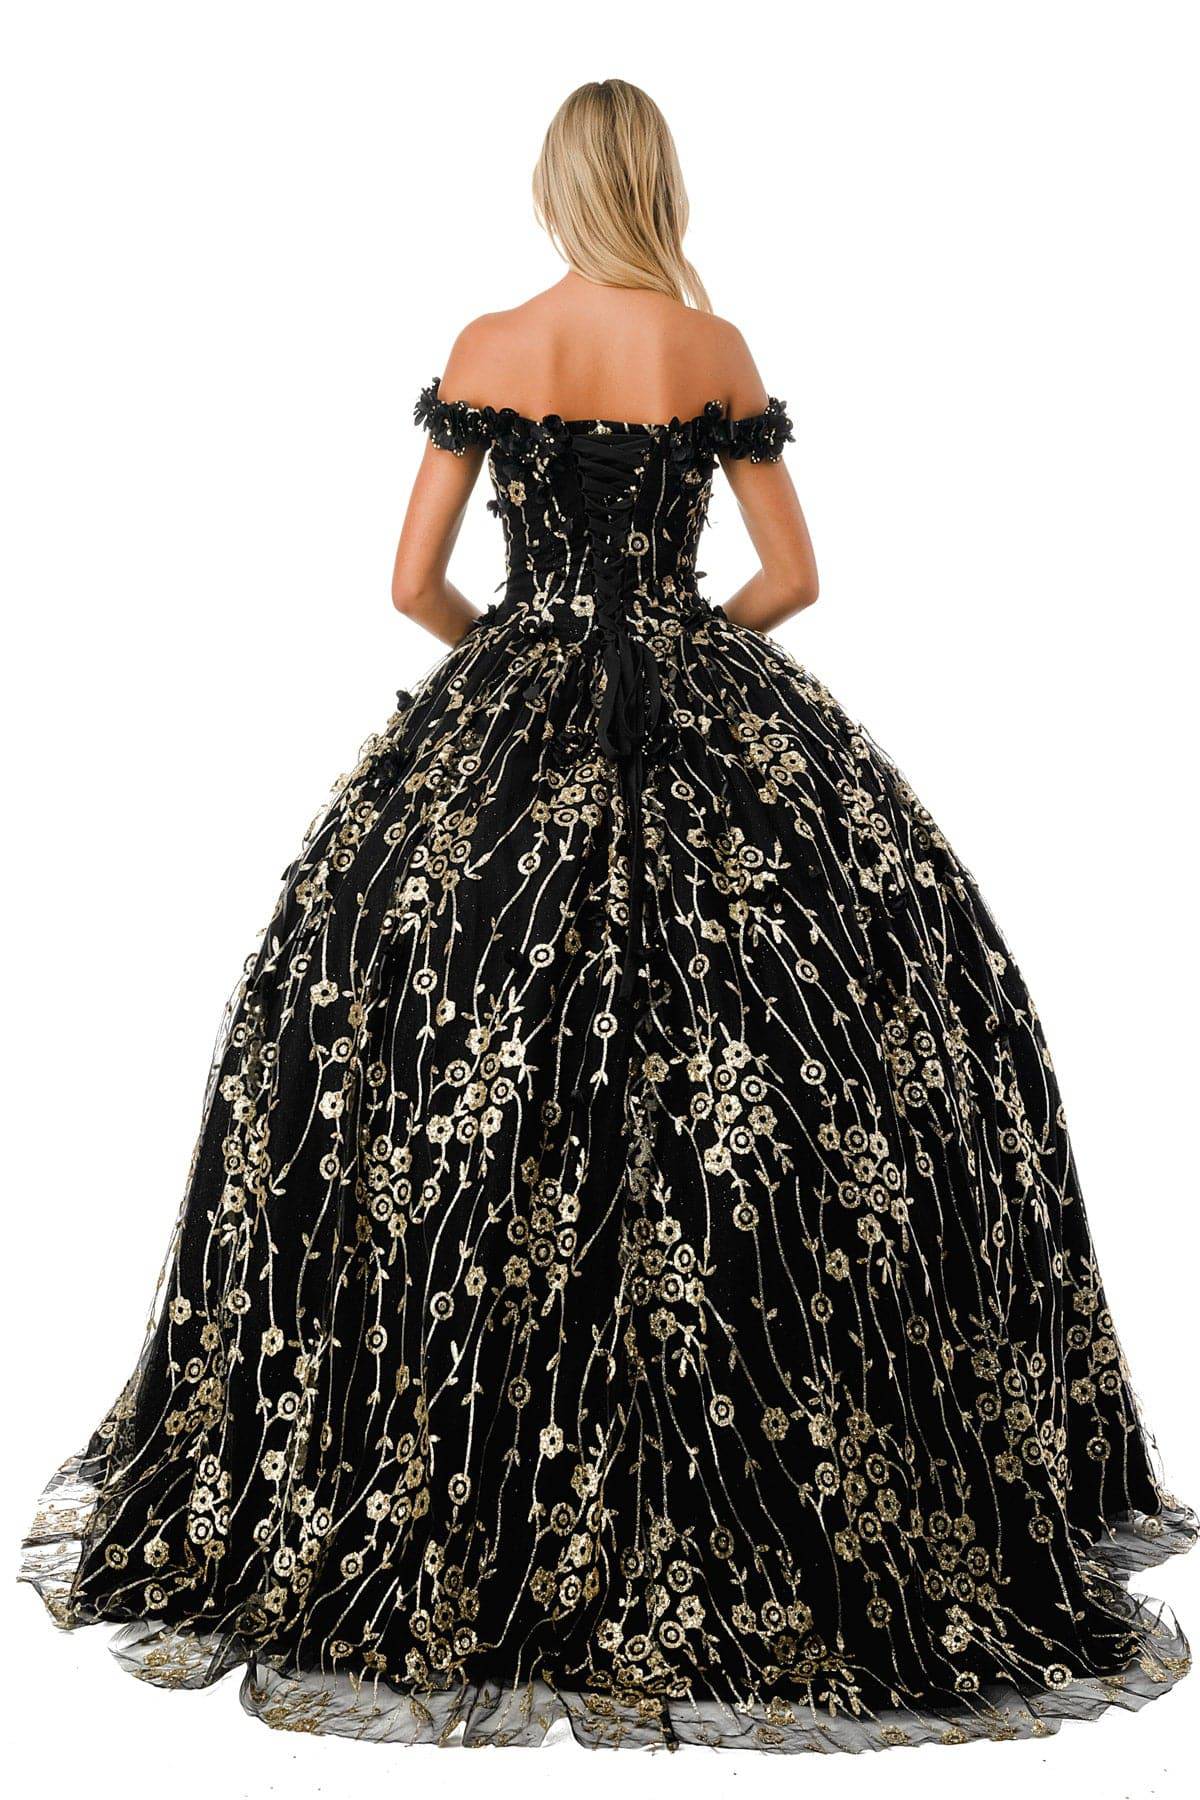 Aspeed L2766A Gorgeous Black & Gold Floral Inspired Ball Gown - NORMA REED